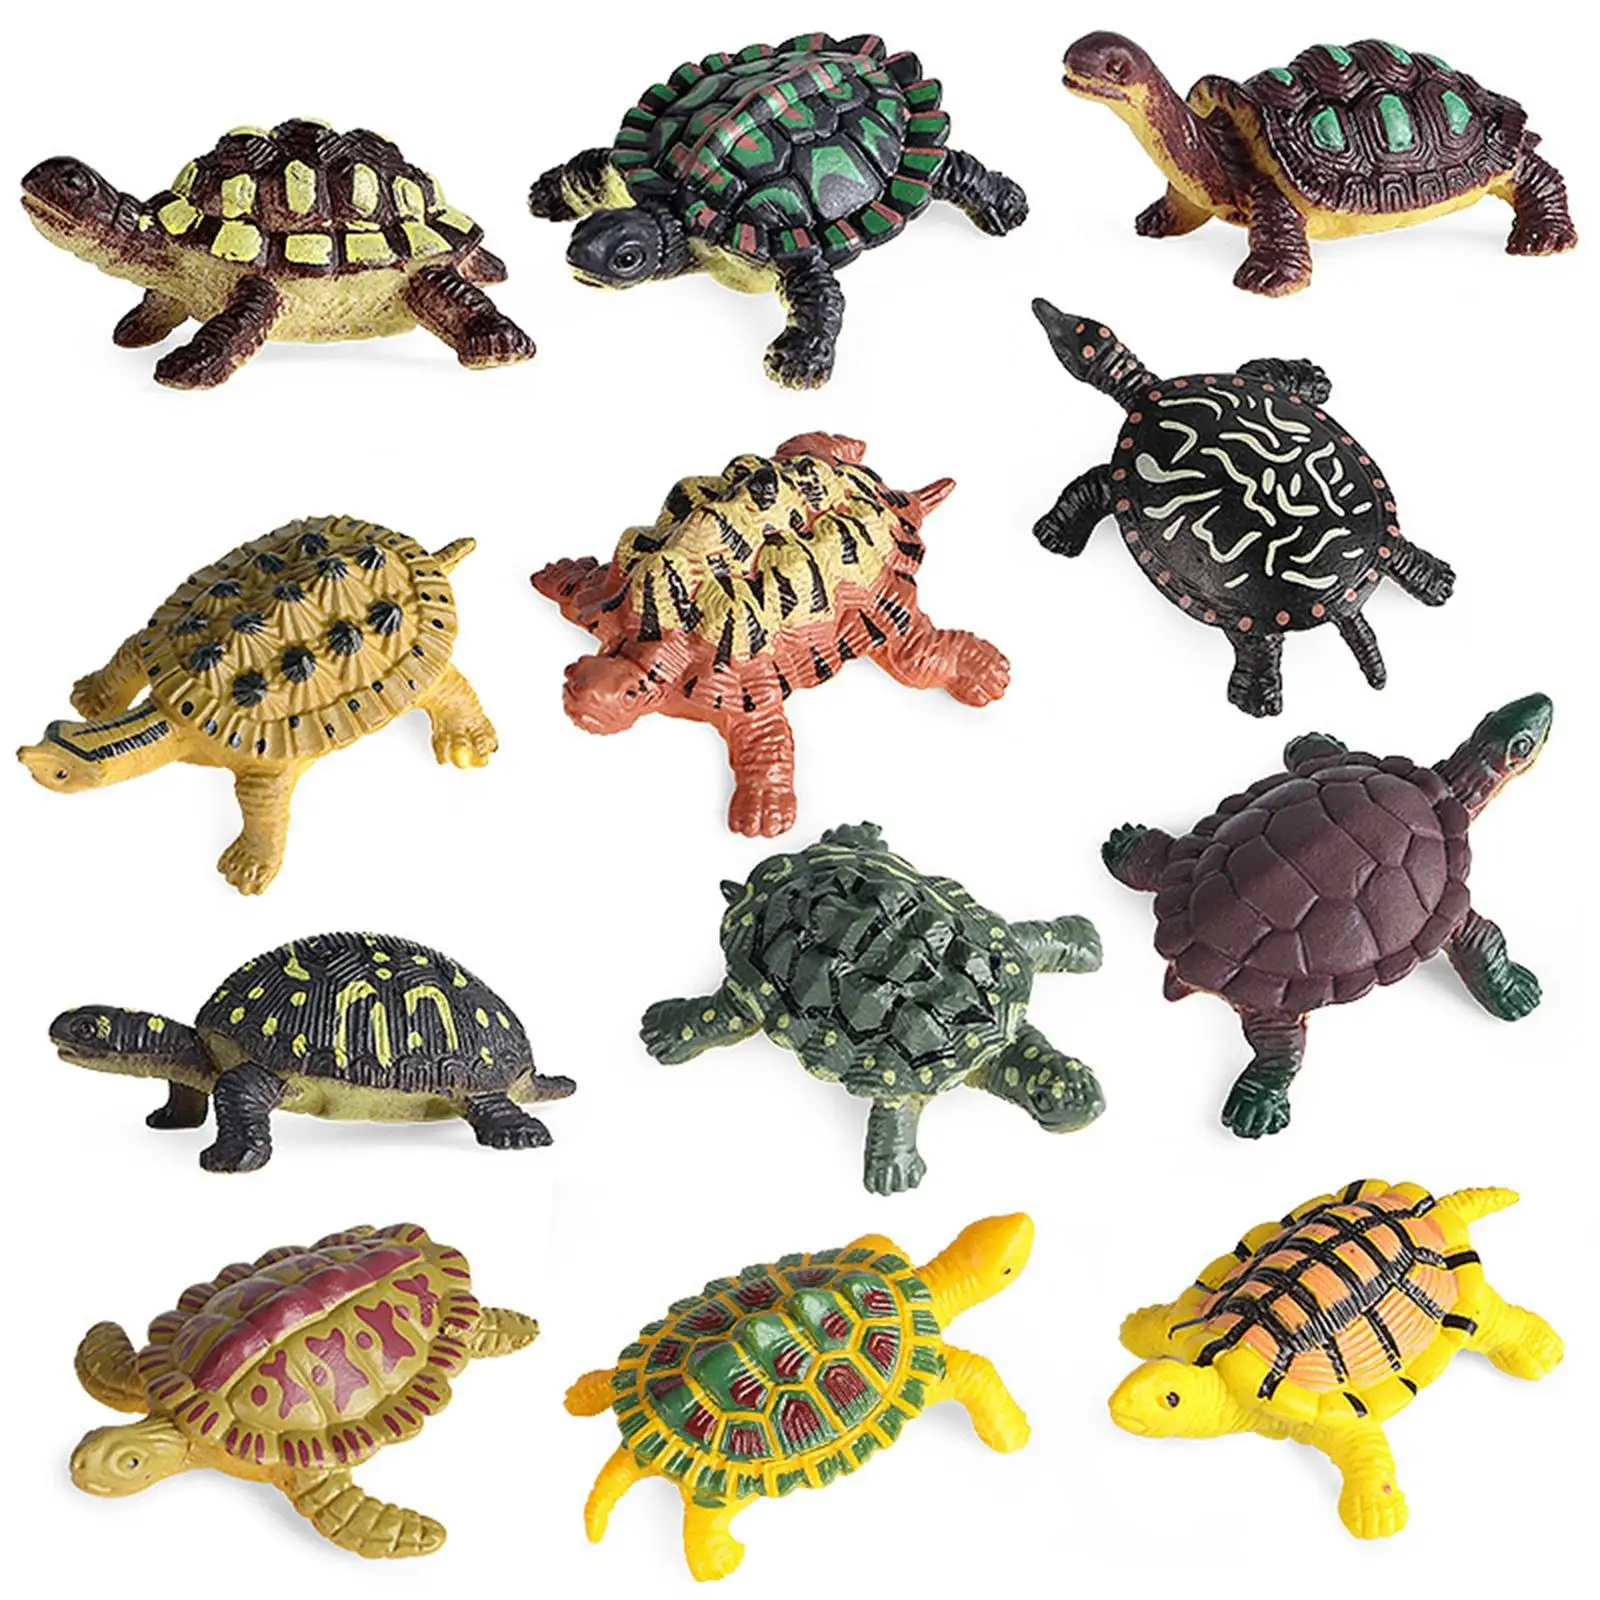 12Pcs Sea Animal Turtle Action Figures Marine Animals Teaching Prop Cognition Toy for Classroom Students